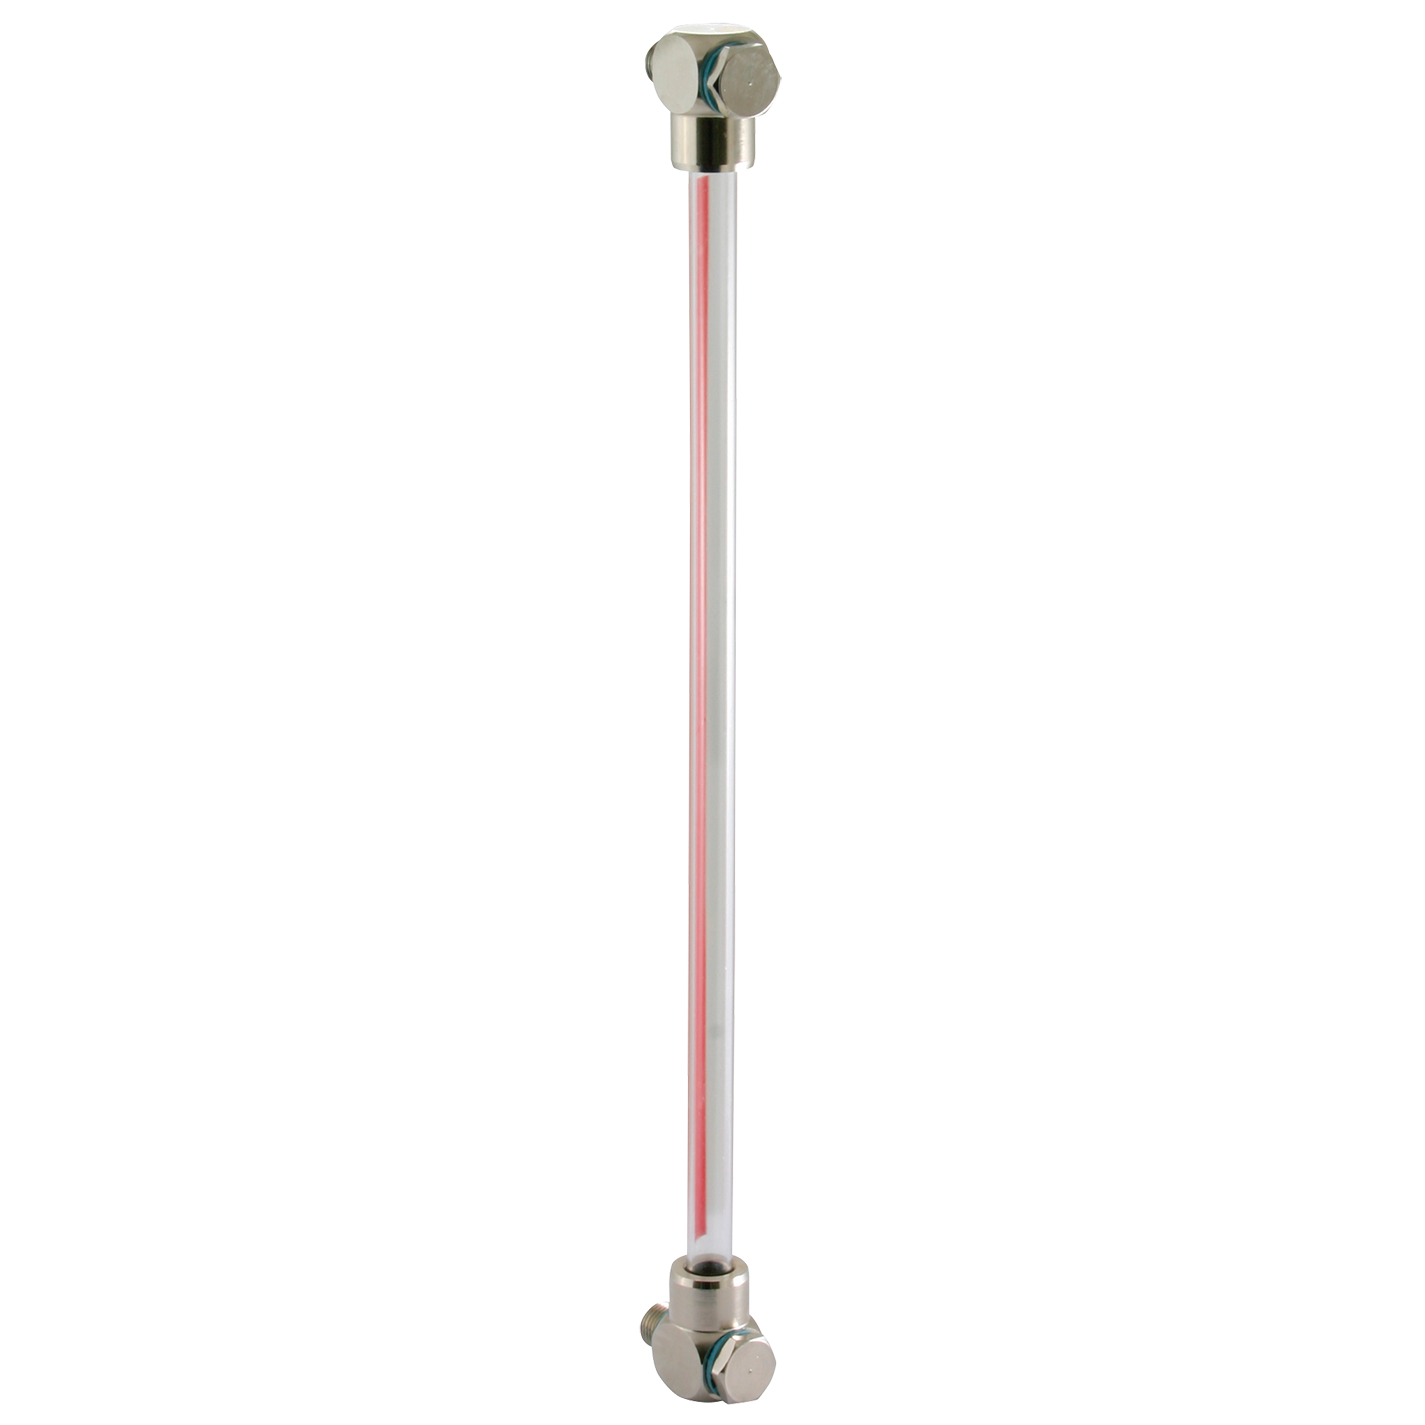 1/4" BSP Fluid Level Gauge W/O Thermometer Centres 250mm